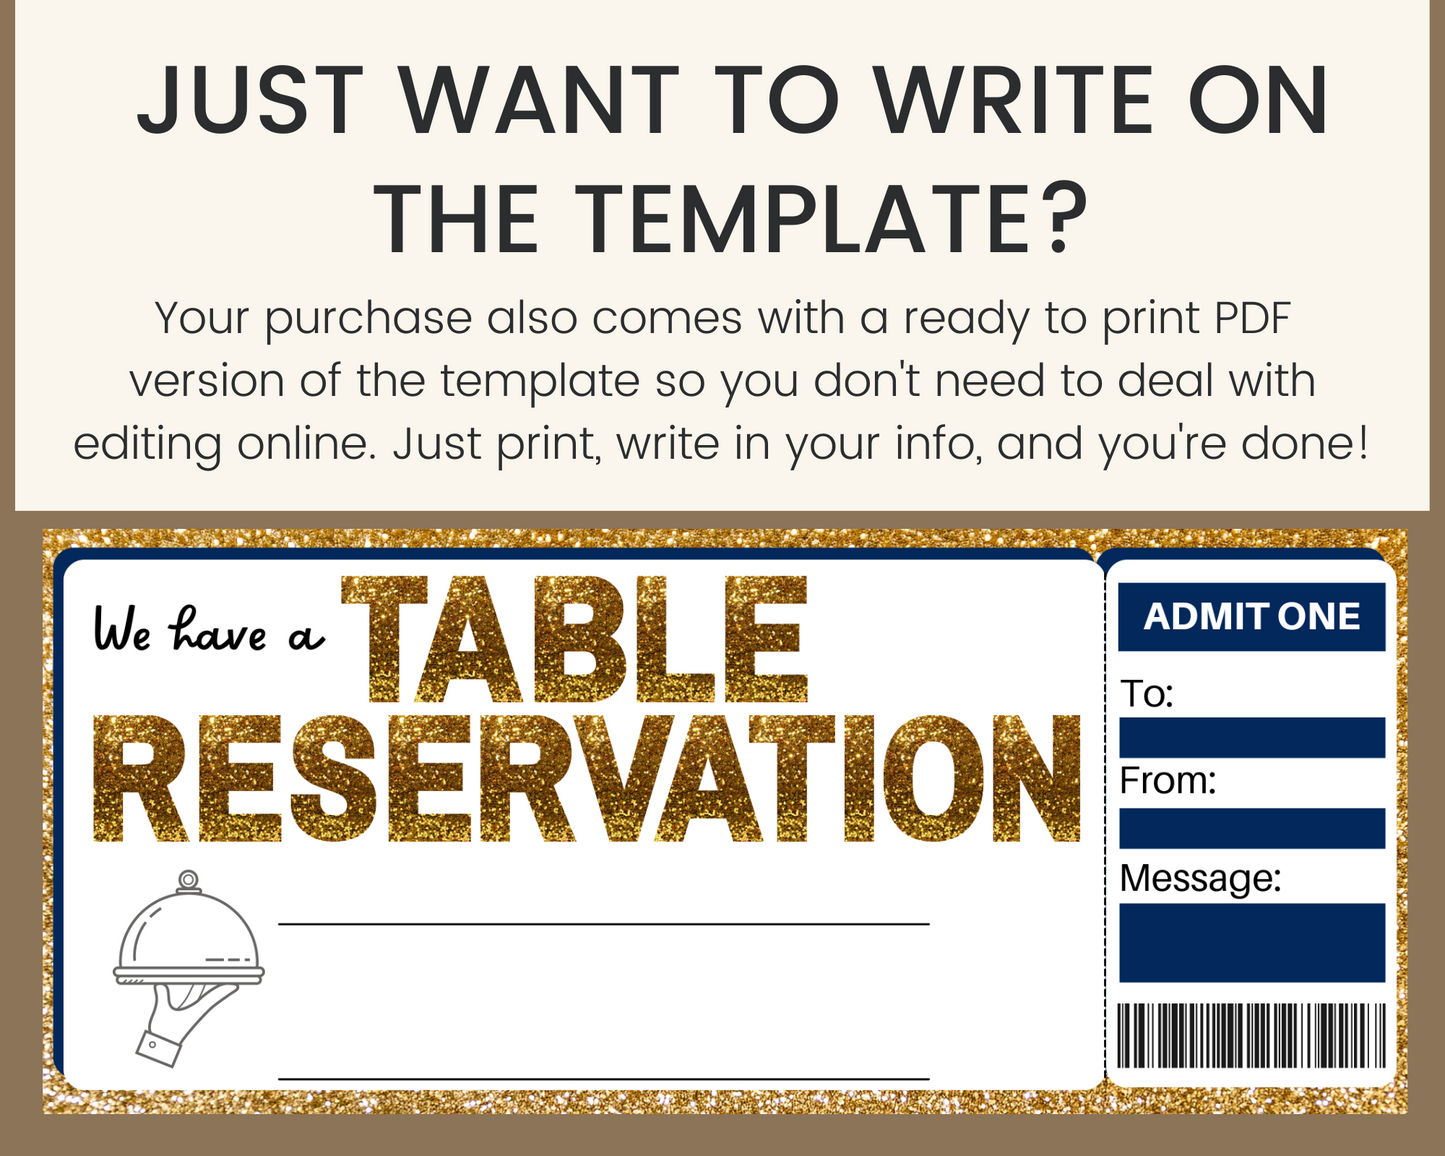 Table Reservation Gift Certificate